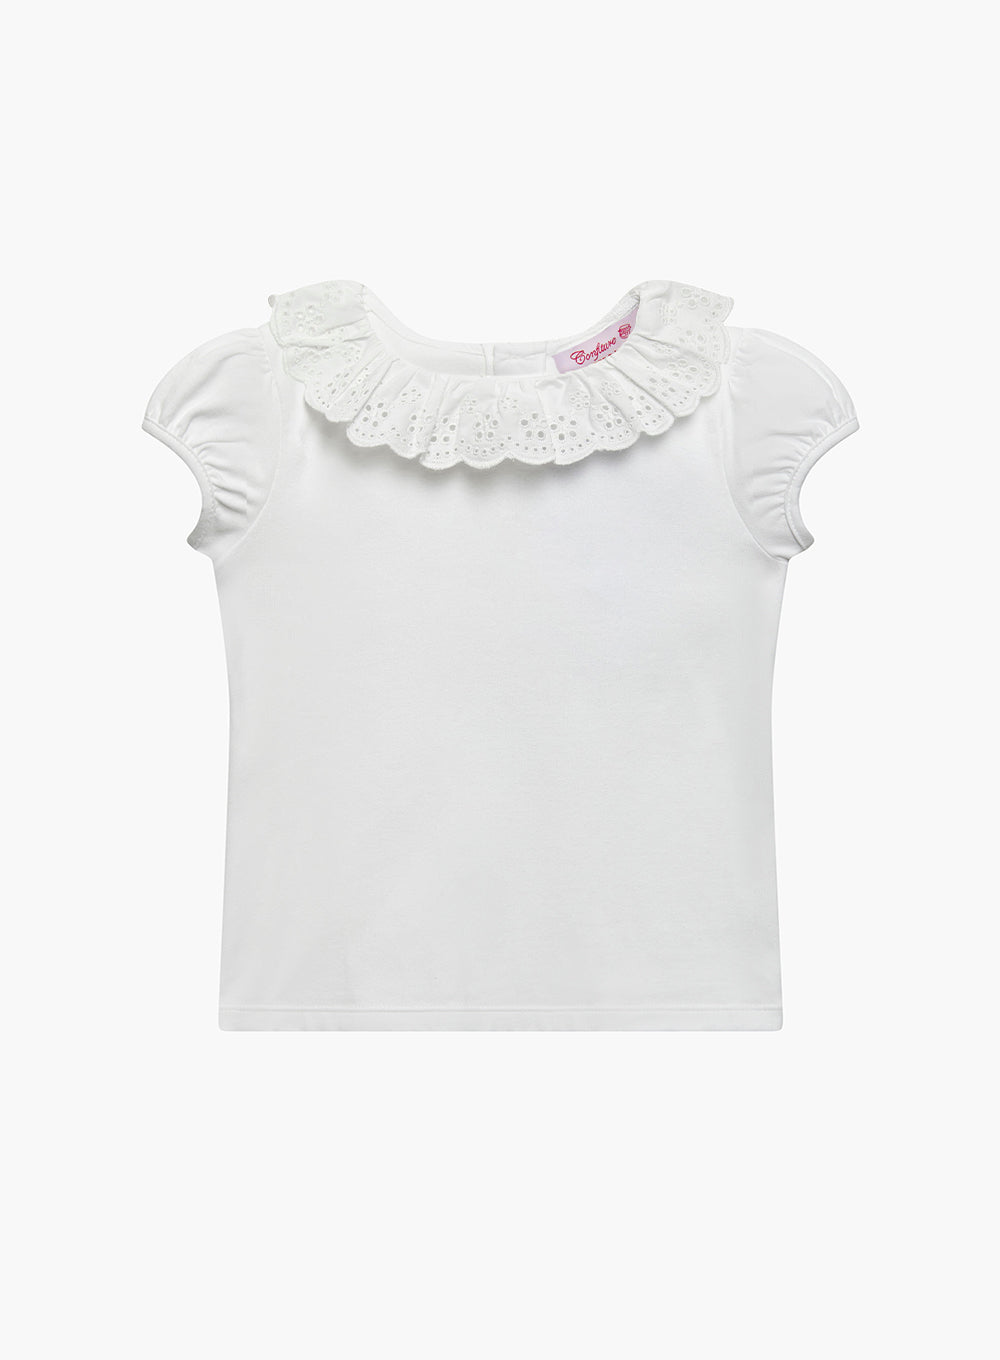 Girls Elsie Willow Jersey Top White | Trotters London – Trotters